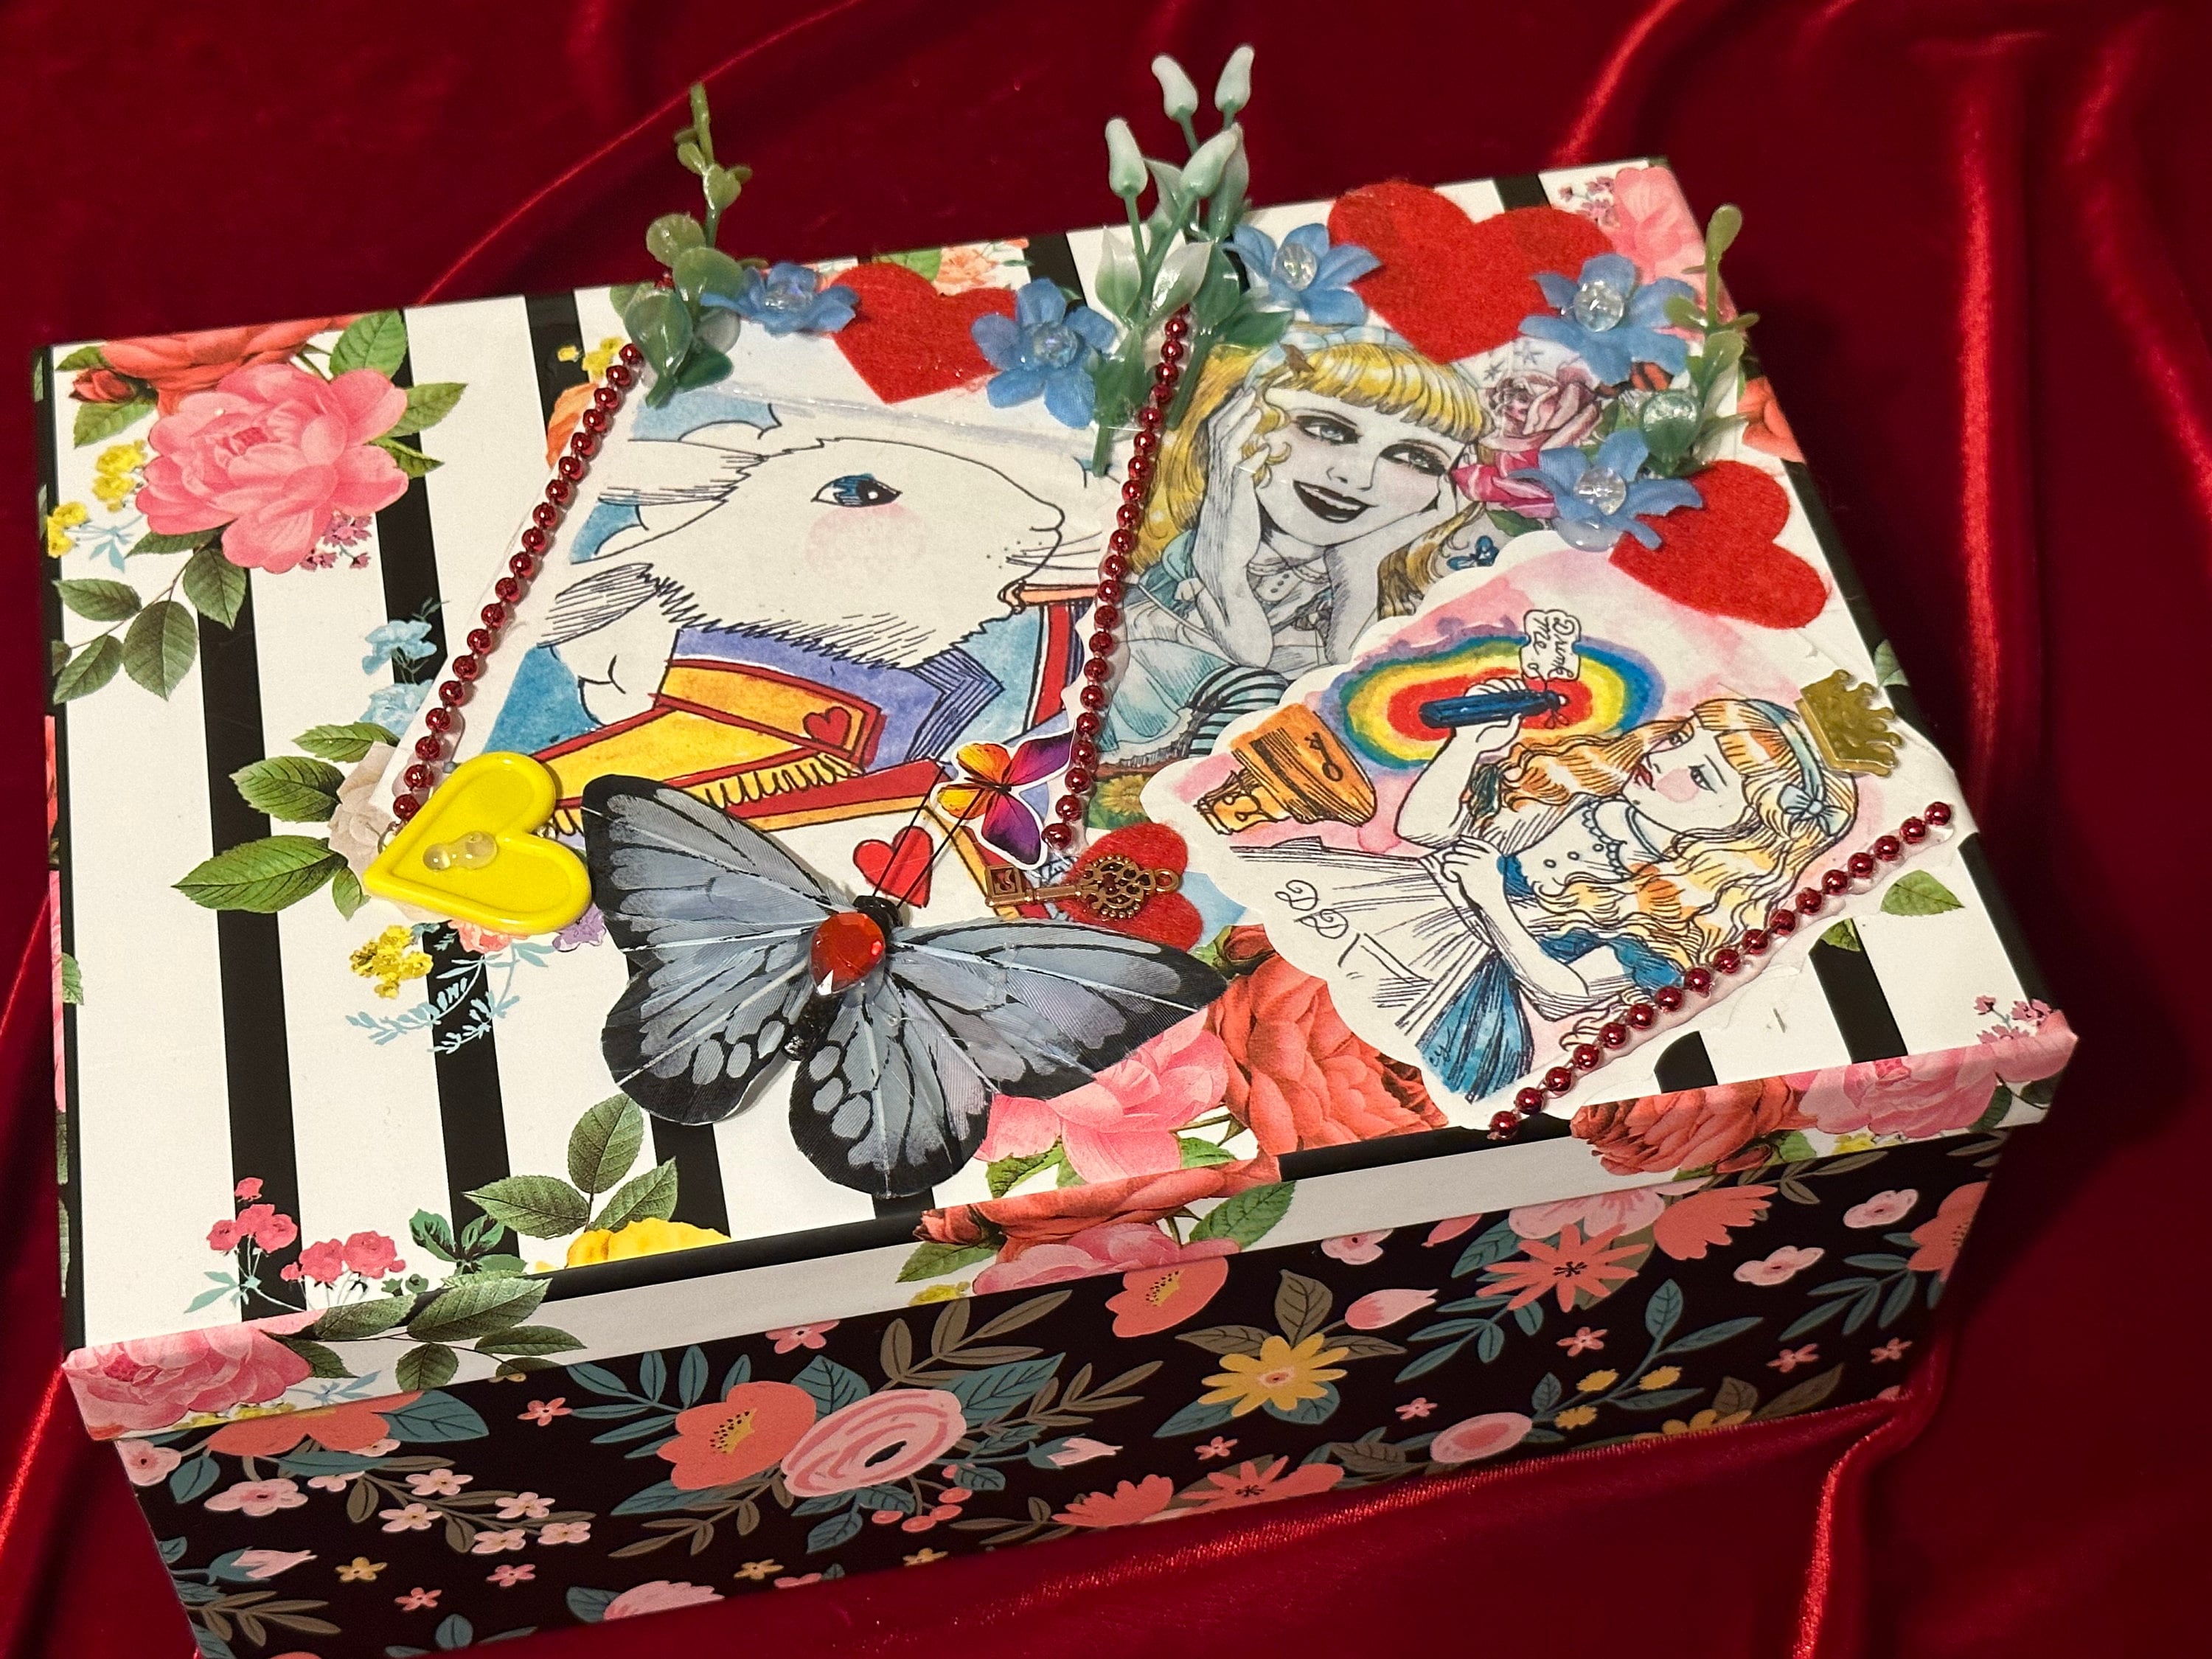 Alice in Wonderland Jewelry Box Gift for Kid